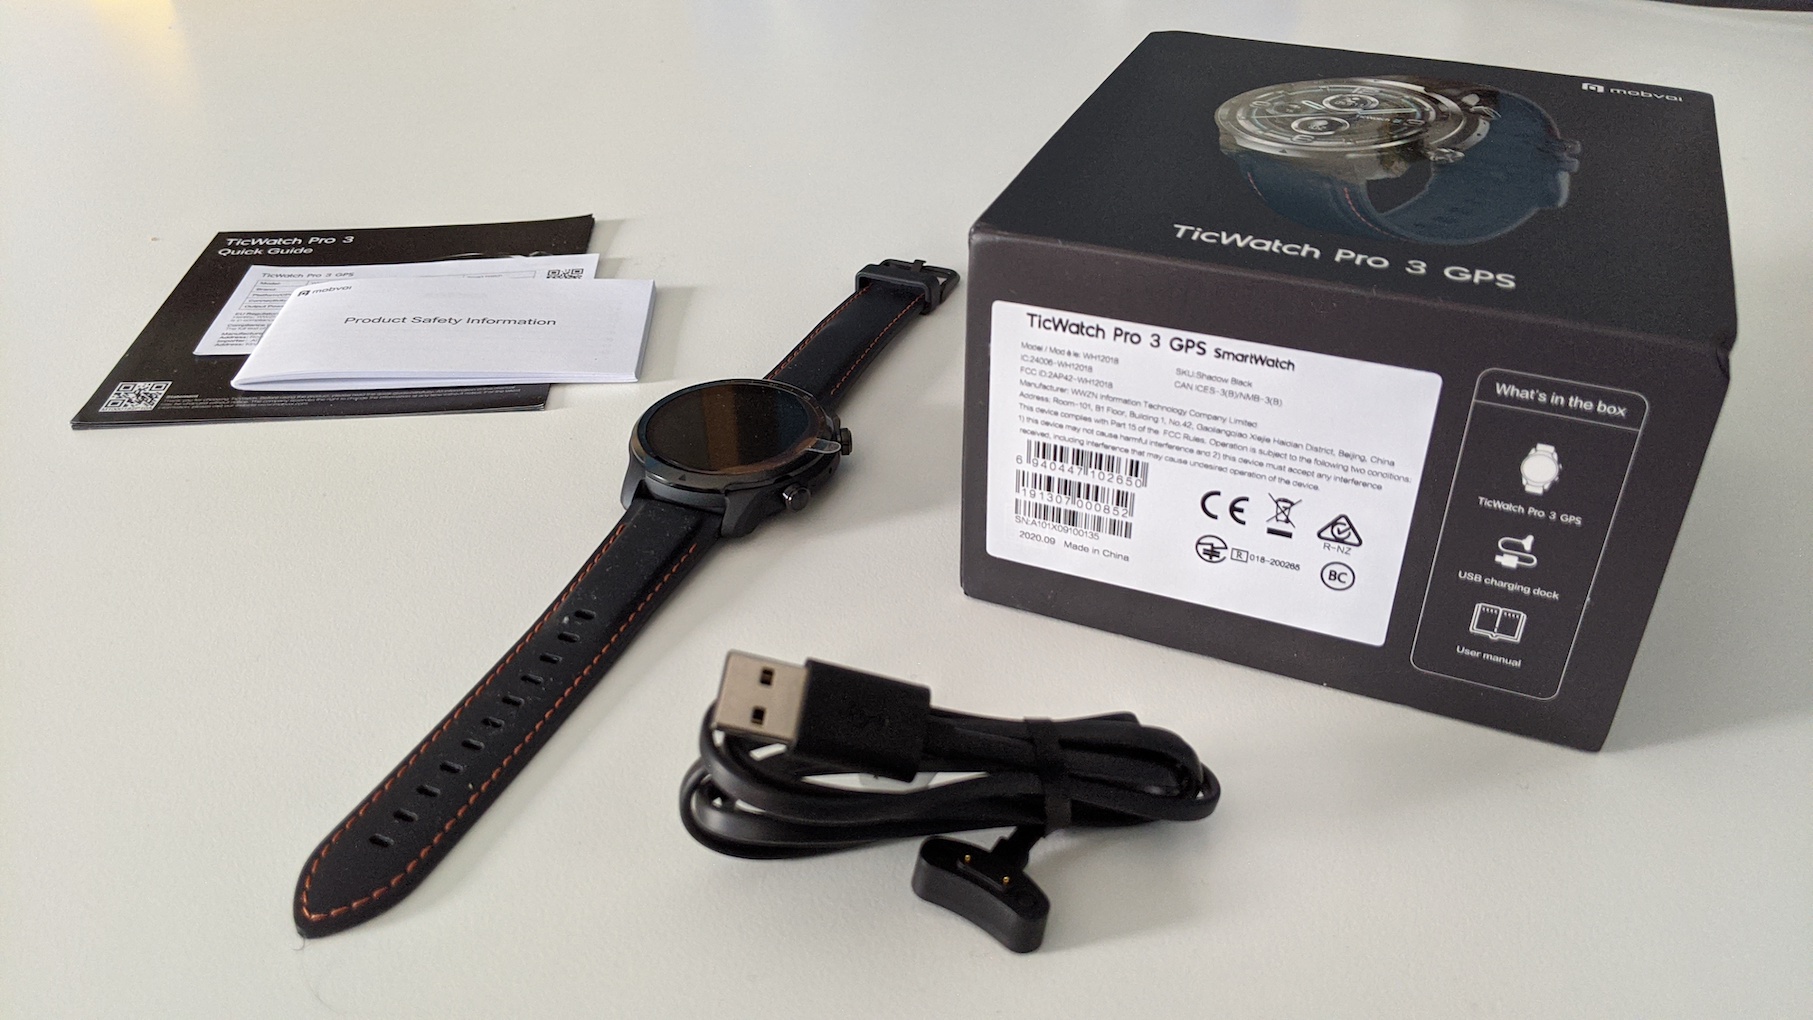 Smartwatch Mobvoi TicWatch Pro 3 GPS with Snapdragon Wear 4100